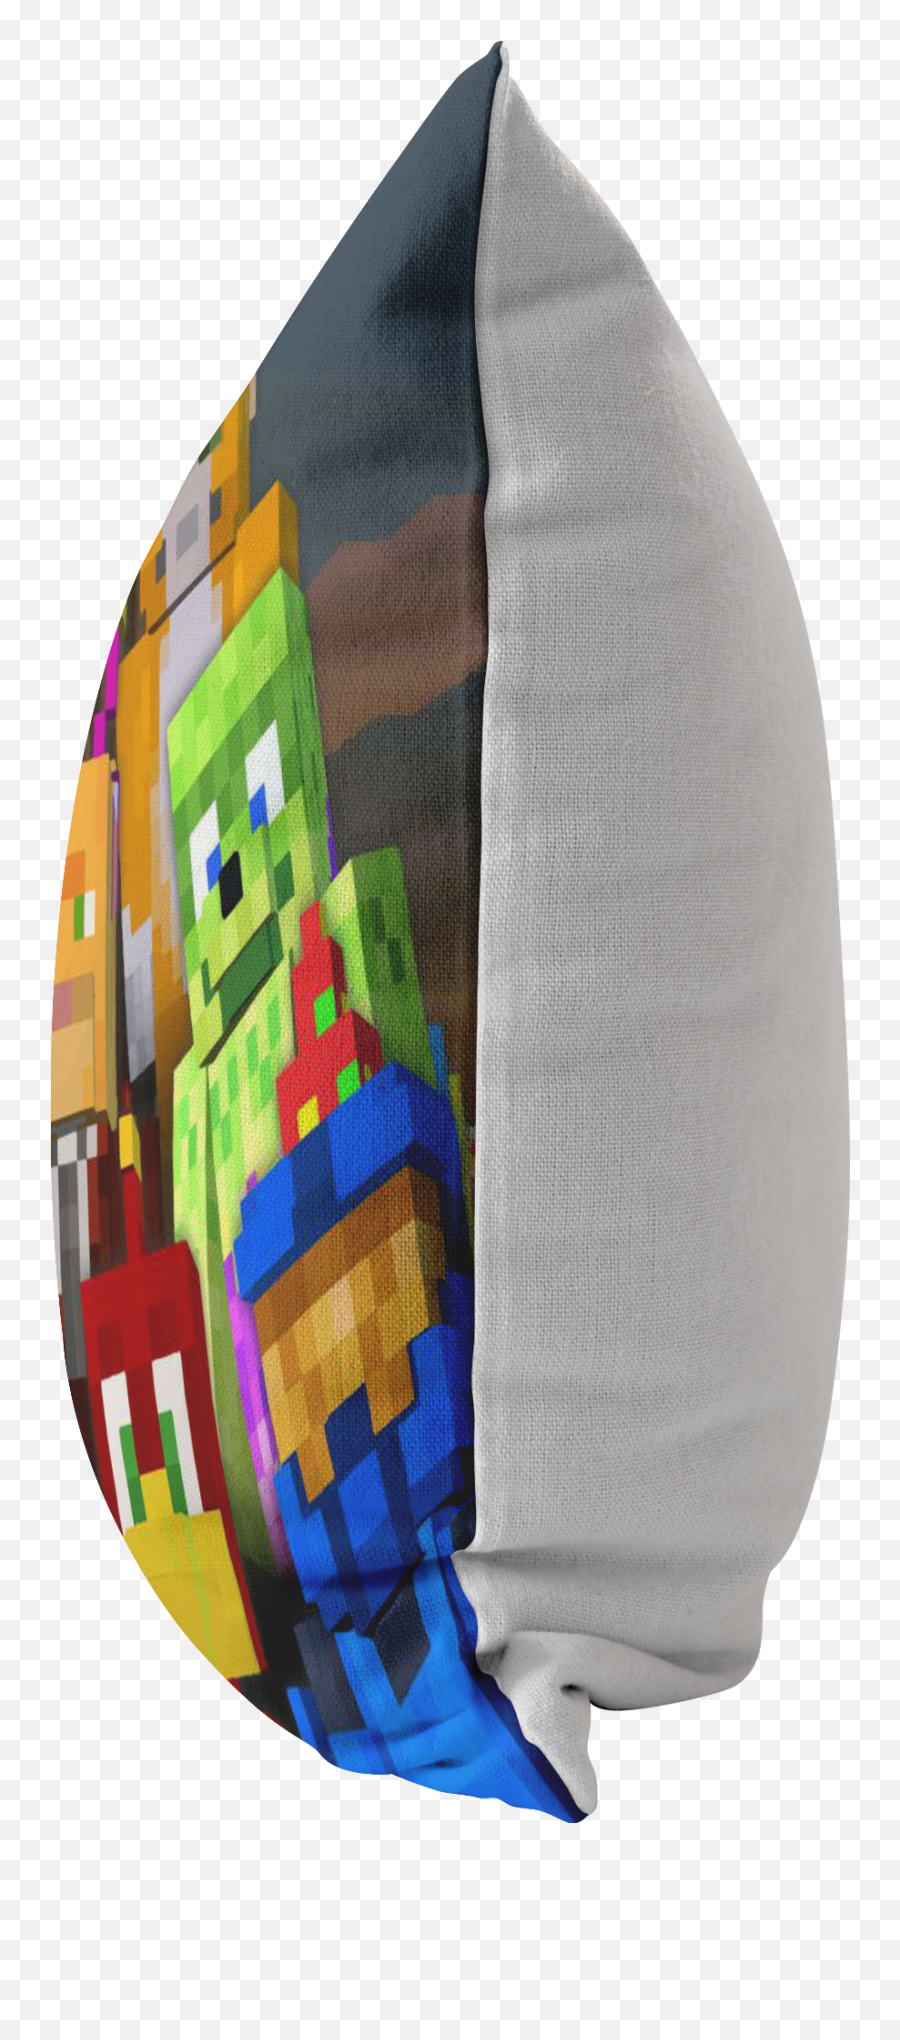 Download Minecraft Bed Png Image - Beanie,Minecraft Bed Png